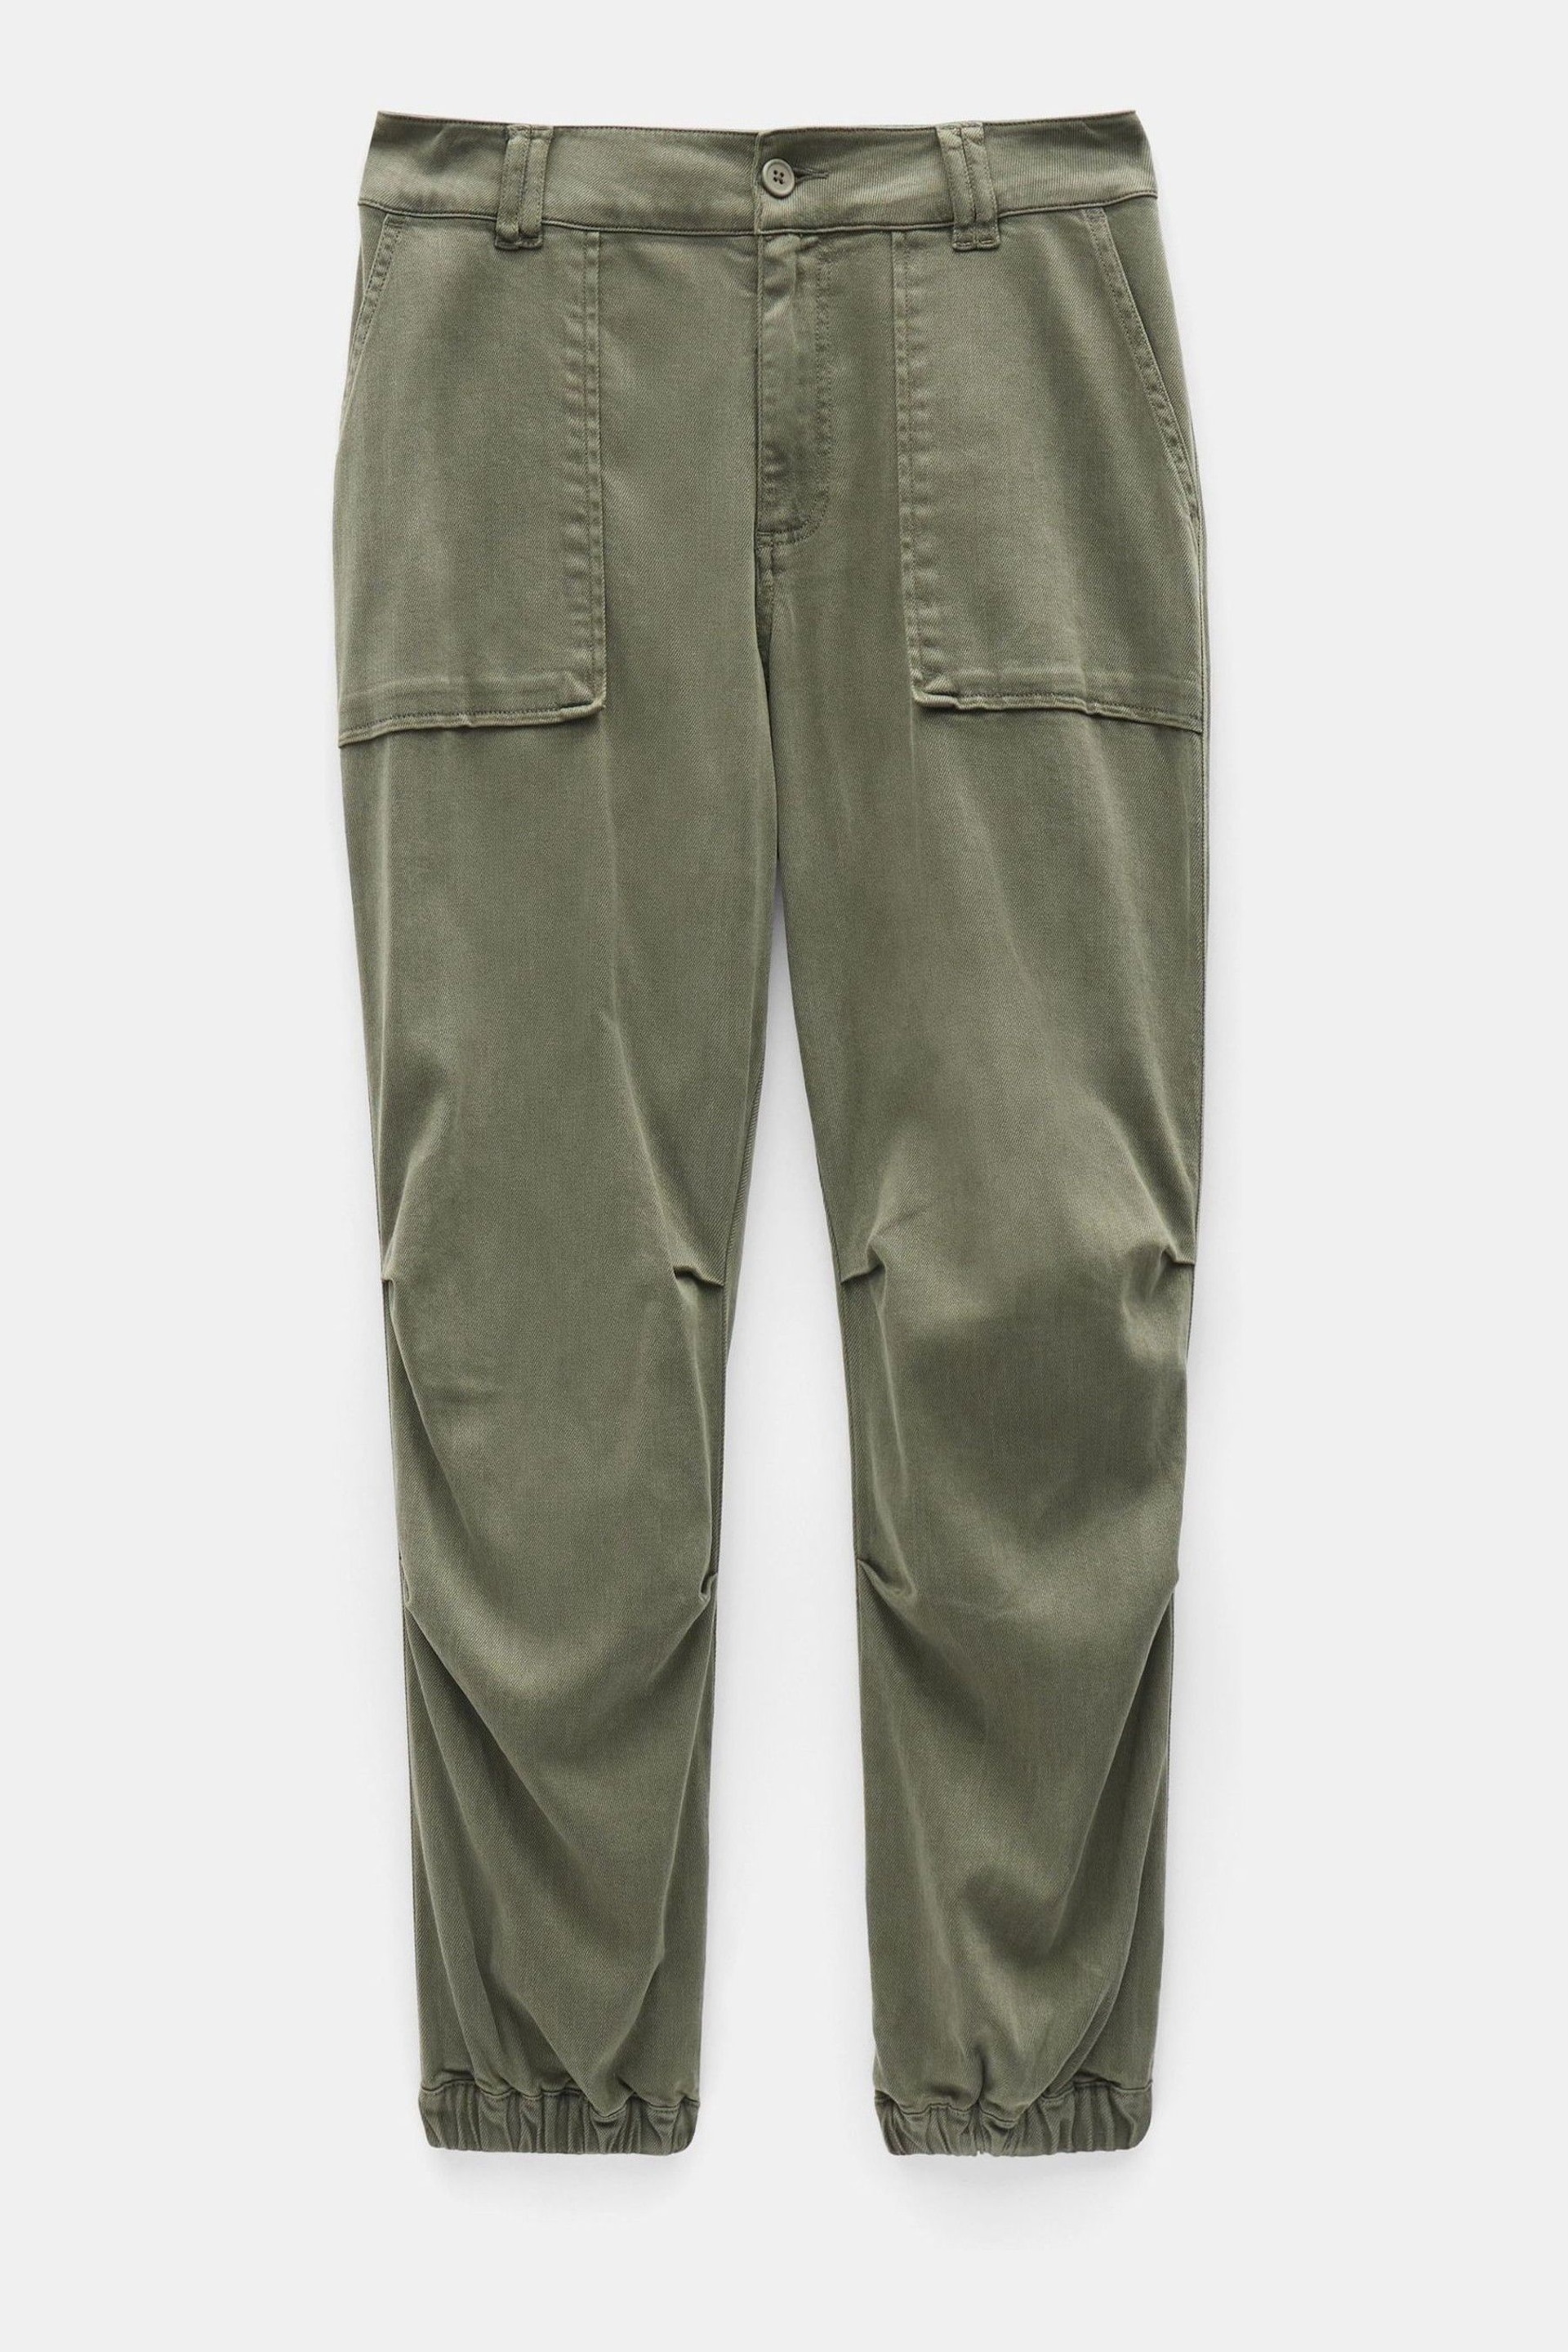 Hush Green Riley Washed Cargo Trousers - Image 5 of 5